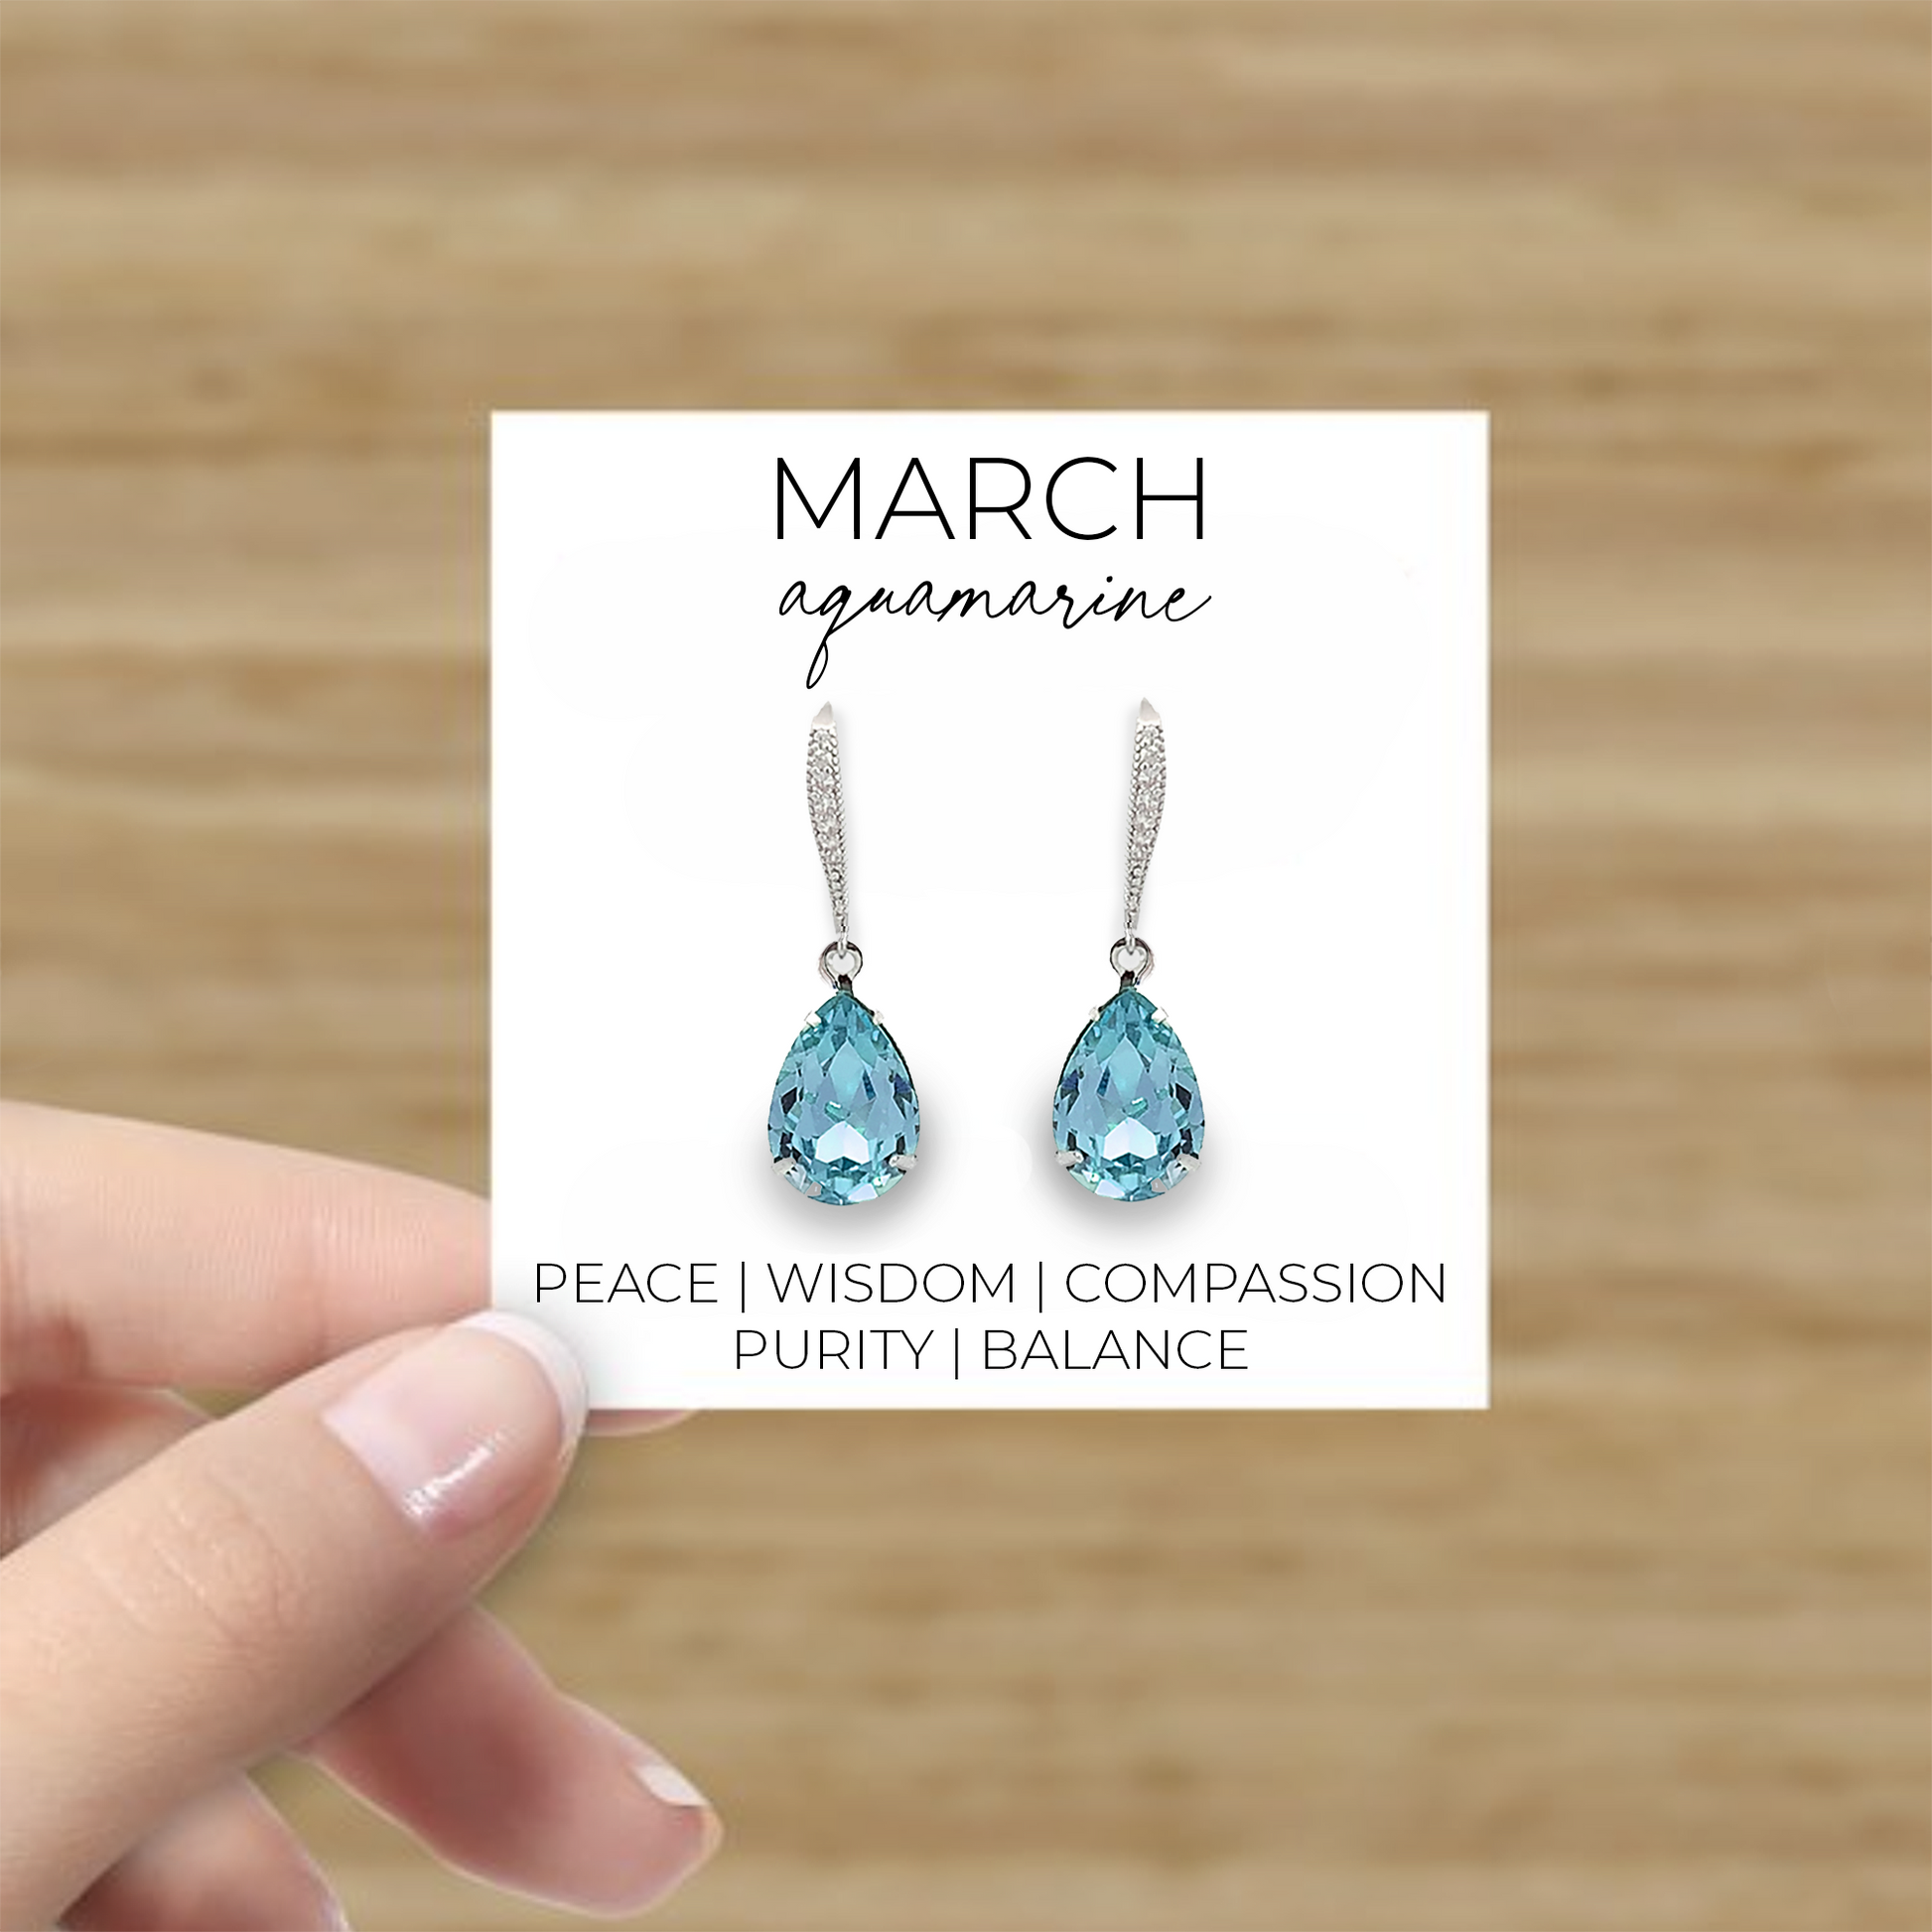 Earring display card for the month of March